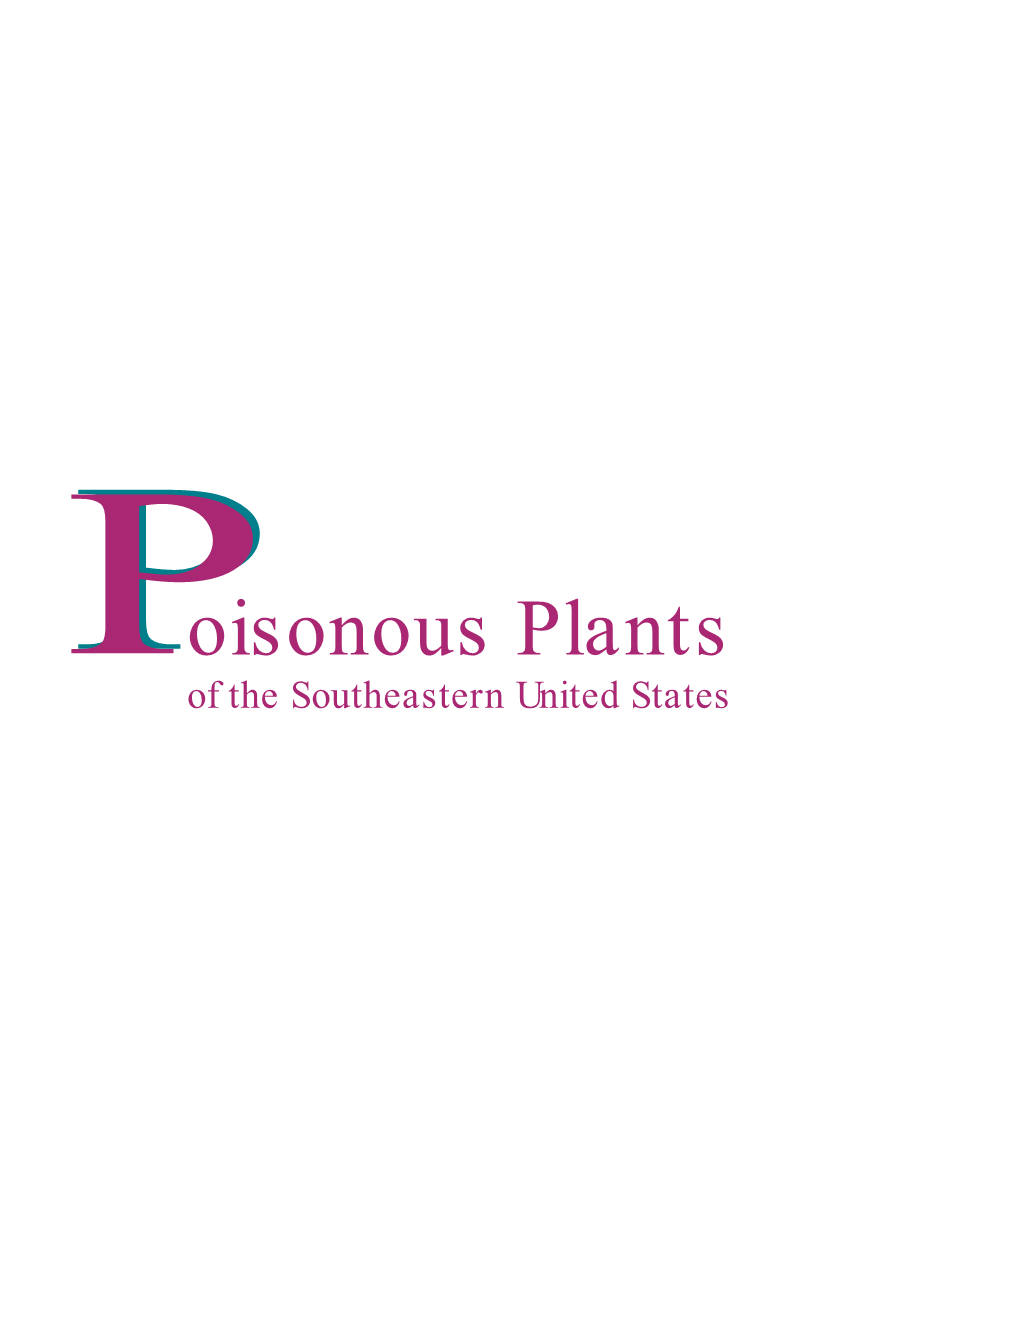 Poisonous Plants of the Southeastern United States Contributing Authors